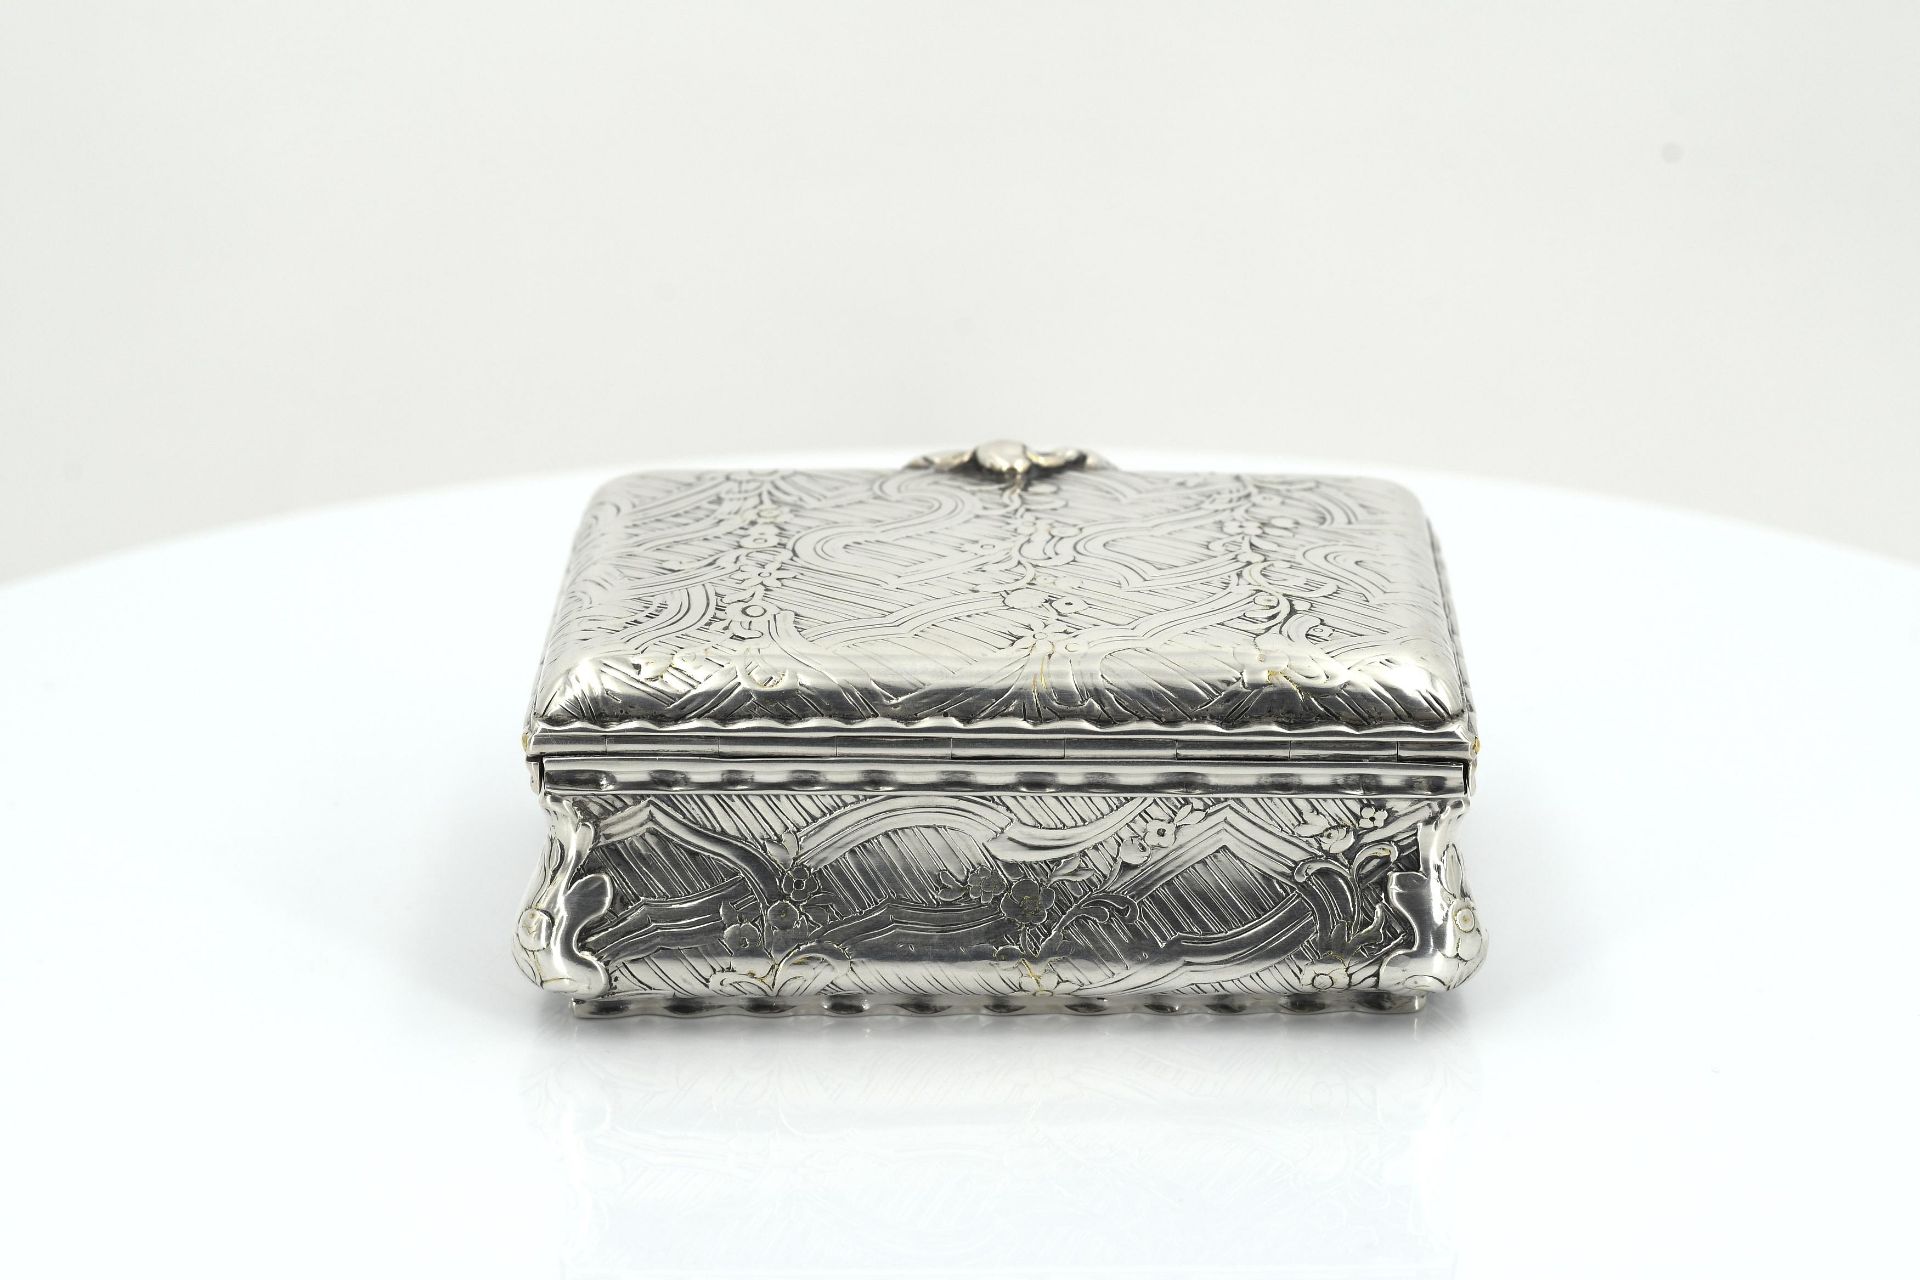 Silver snuffbox with flower tendrils - Image 4 of 9